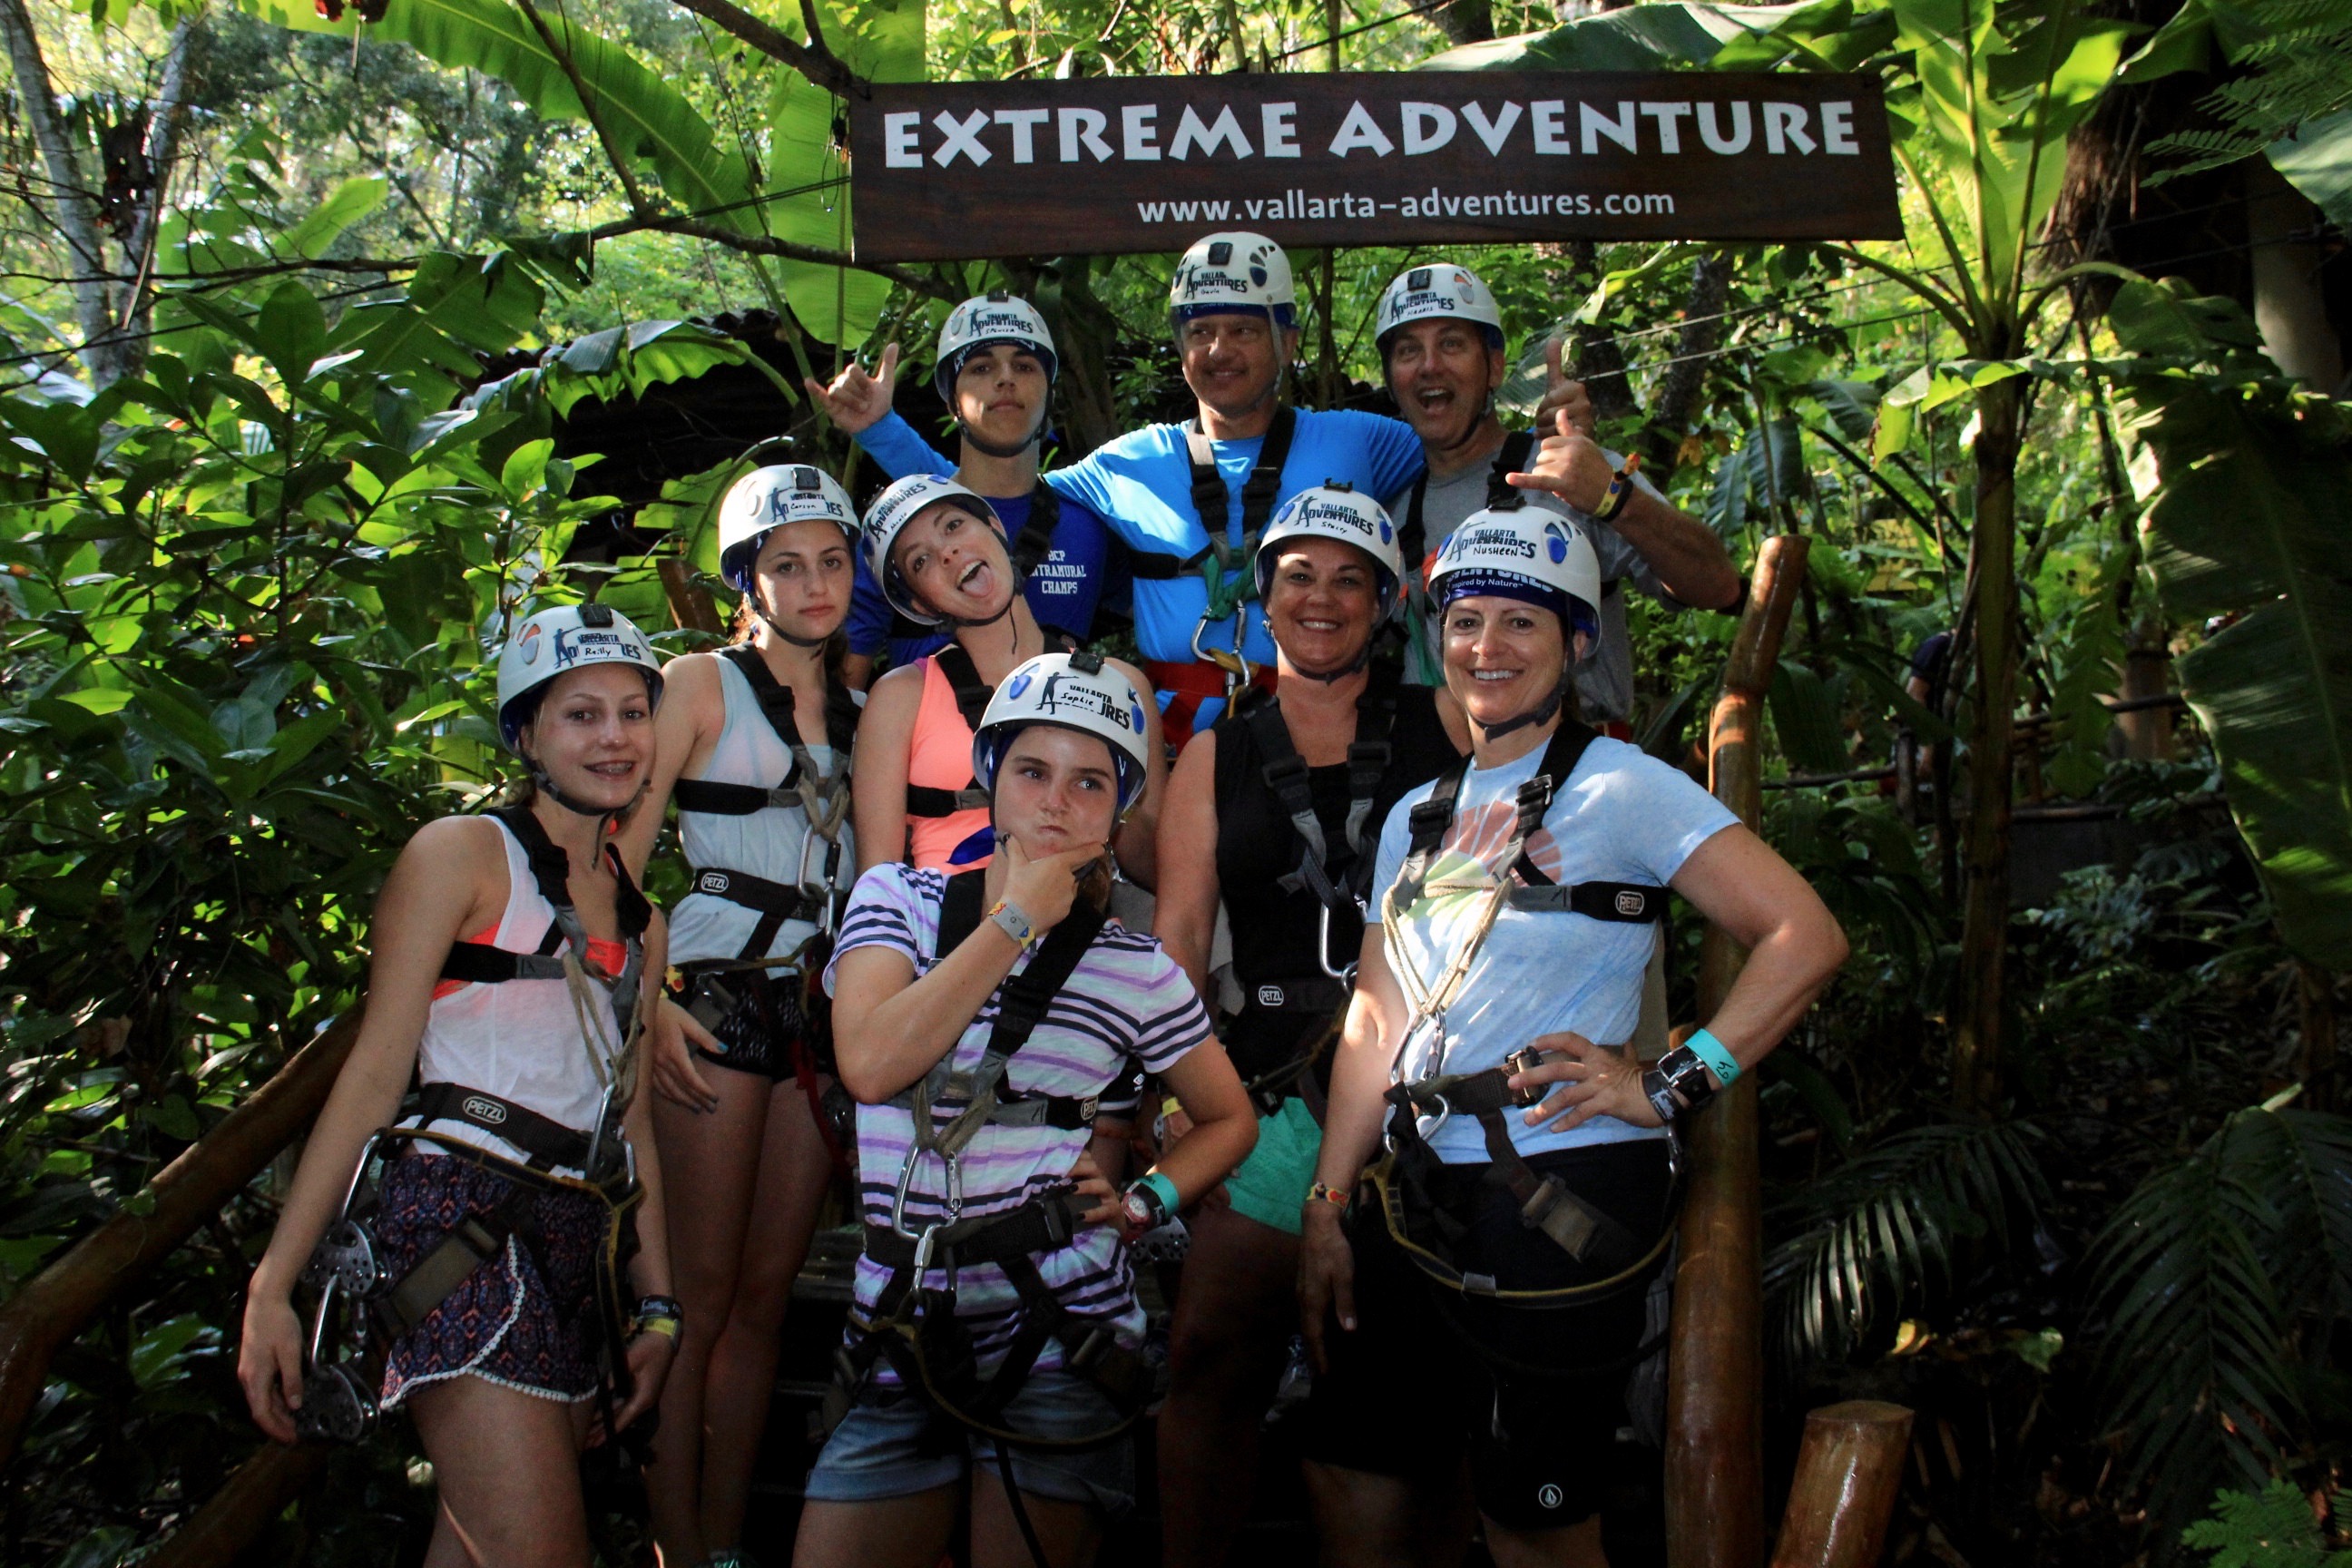 We Loved Our Outings with Vallarta Adventures!